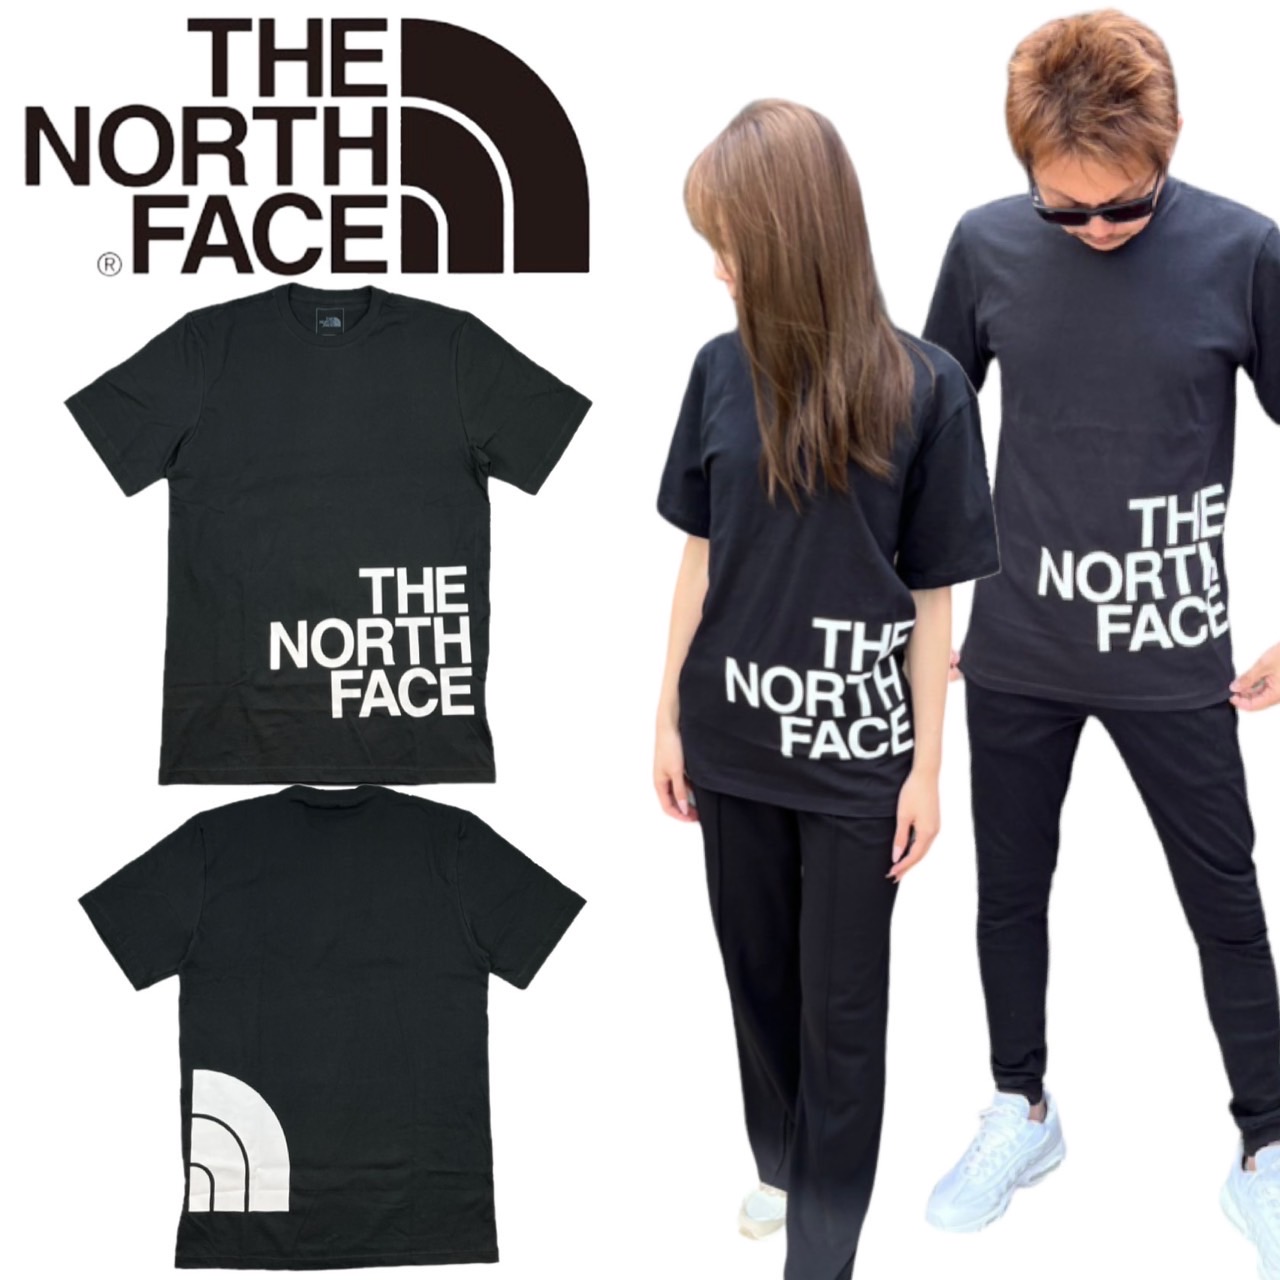 Camiseta The North Face Brand Proud 812IN